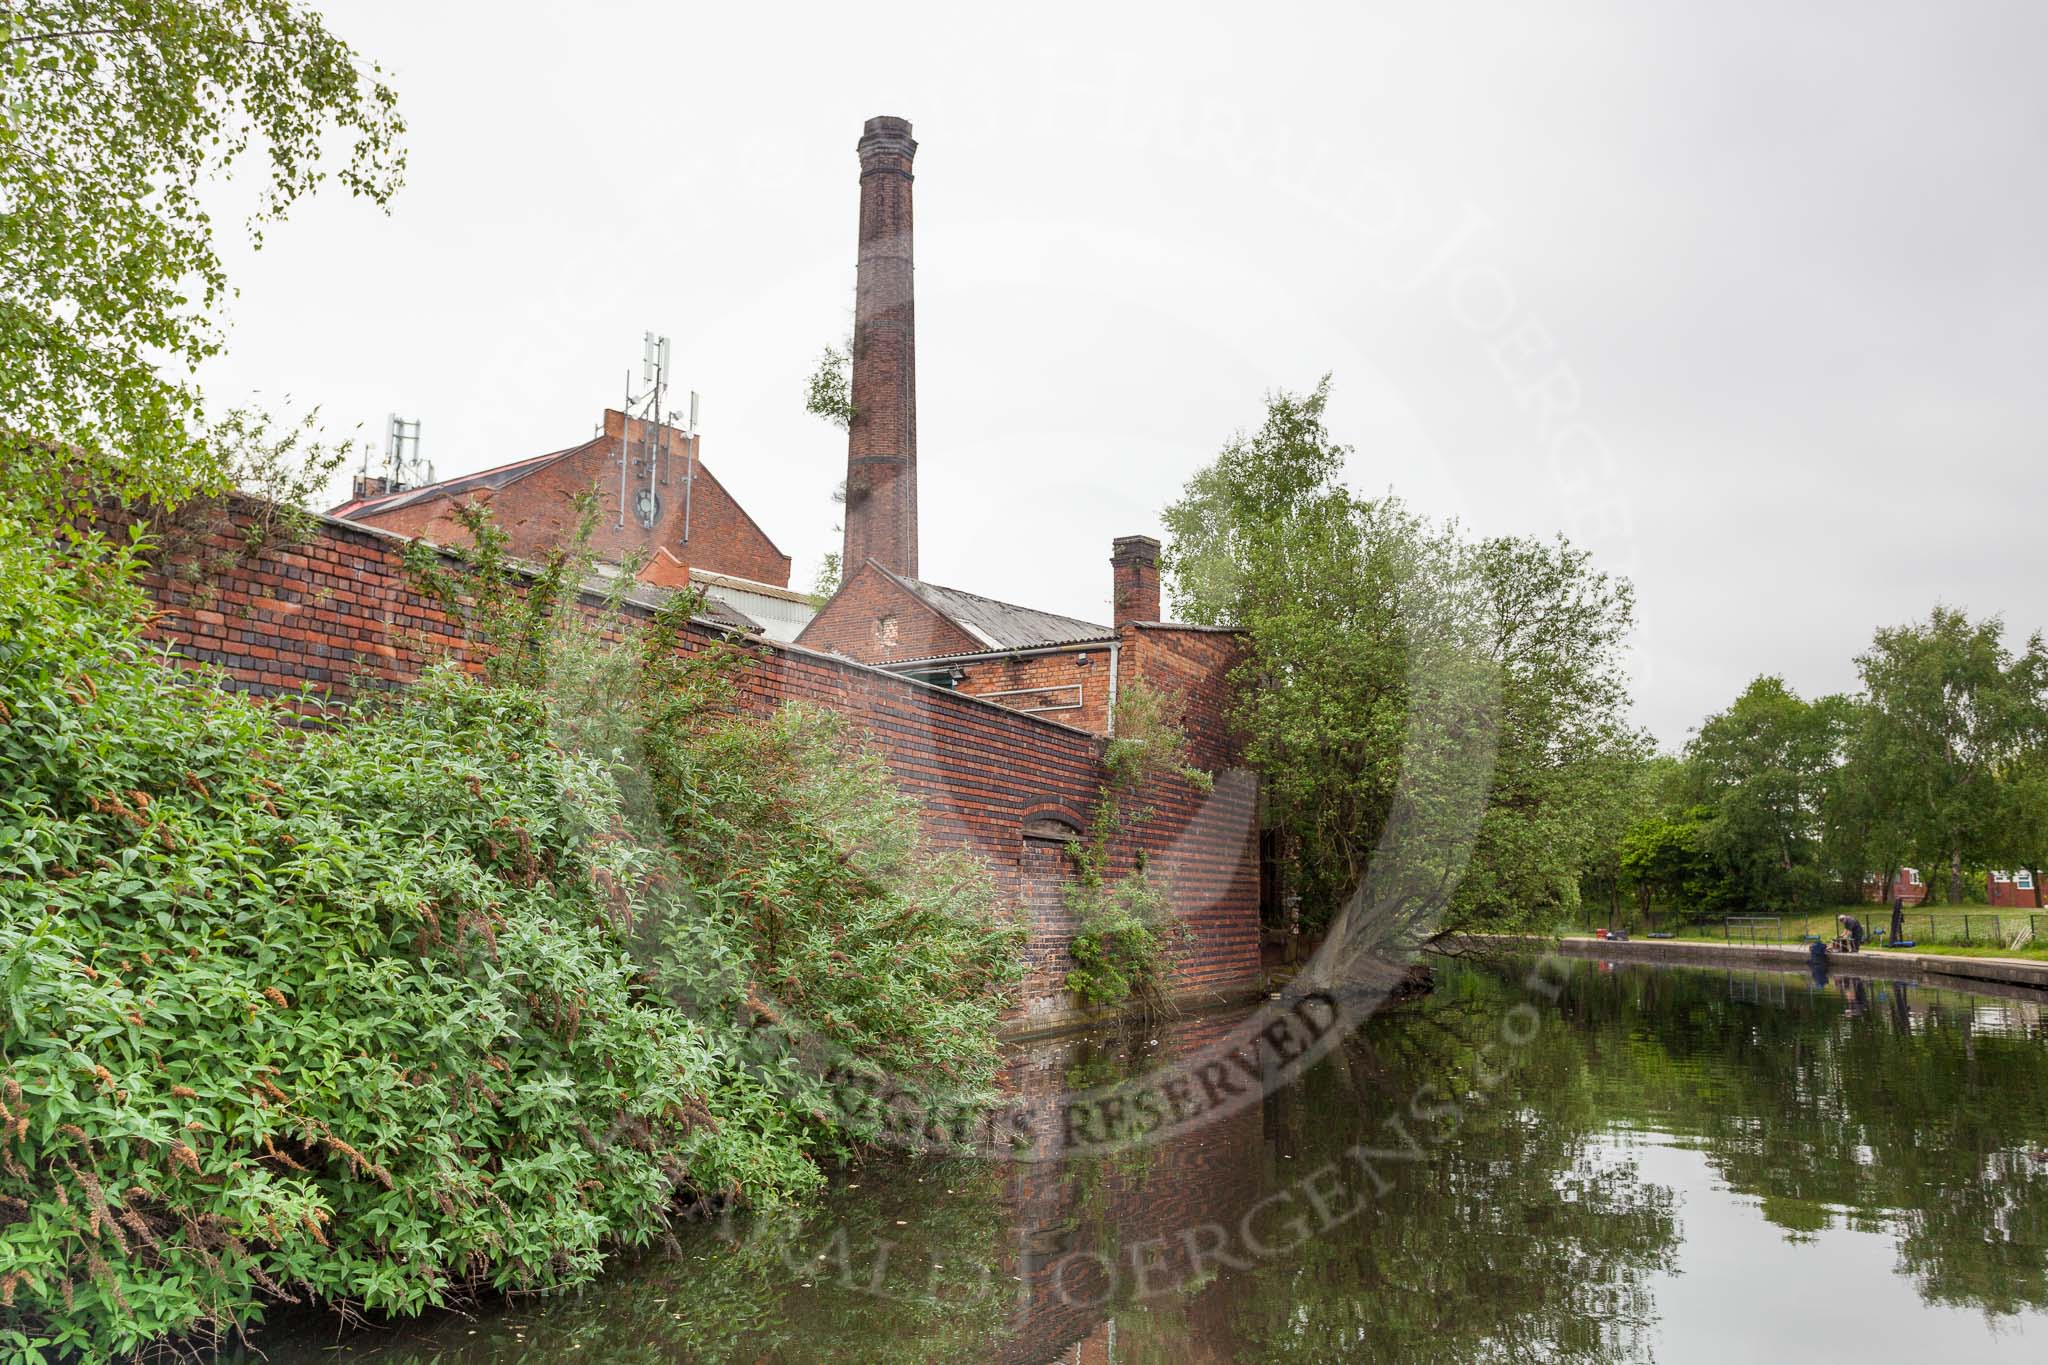 BCN 24h Marathon Challenge 2015: The factory on the left seems to have used the canal for transport. Now it is used to hold mobile phone transmitters..
Birmingham Canal Navigations,



on 23 May 2015 at 09:05, image #31